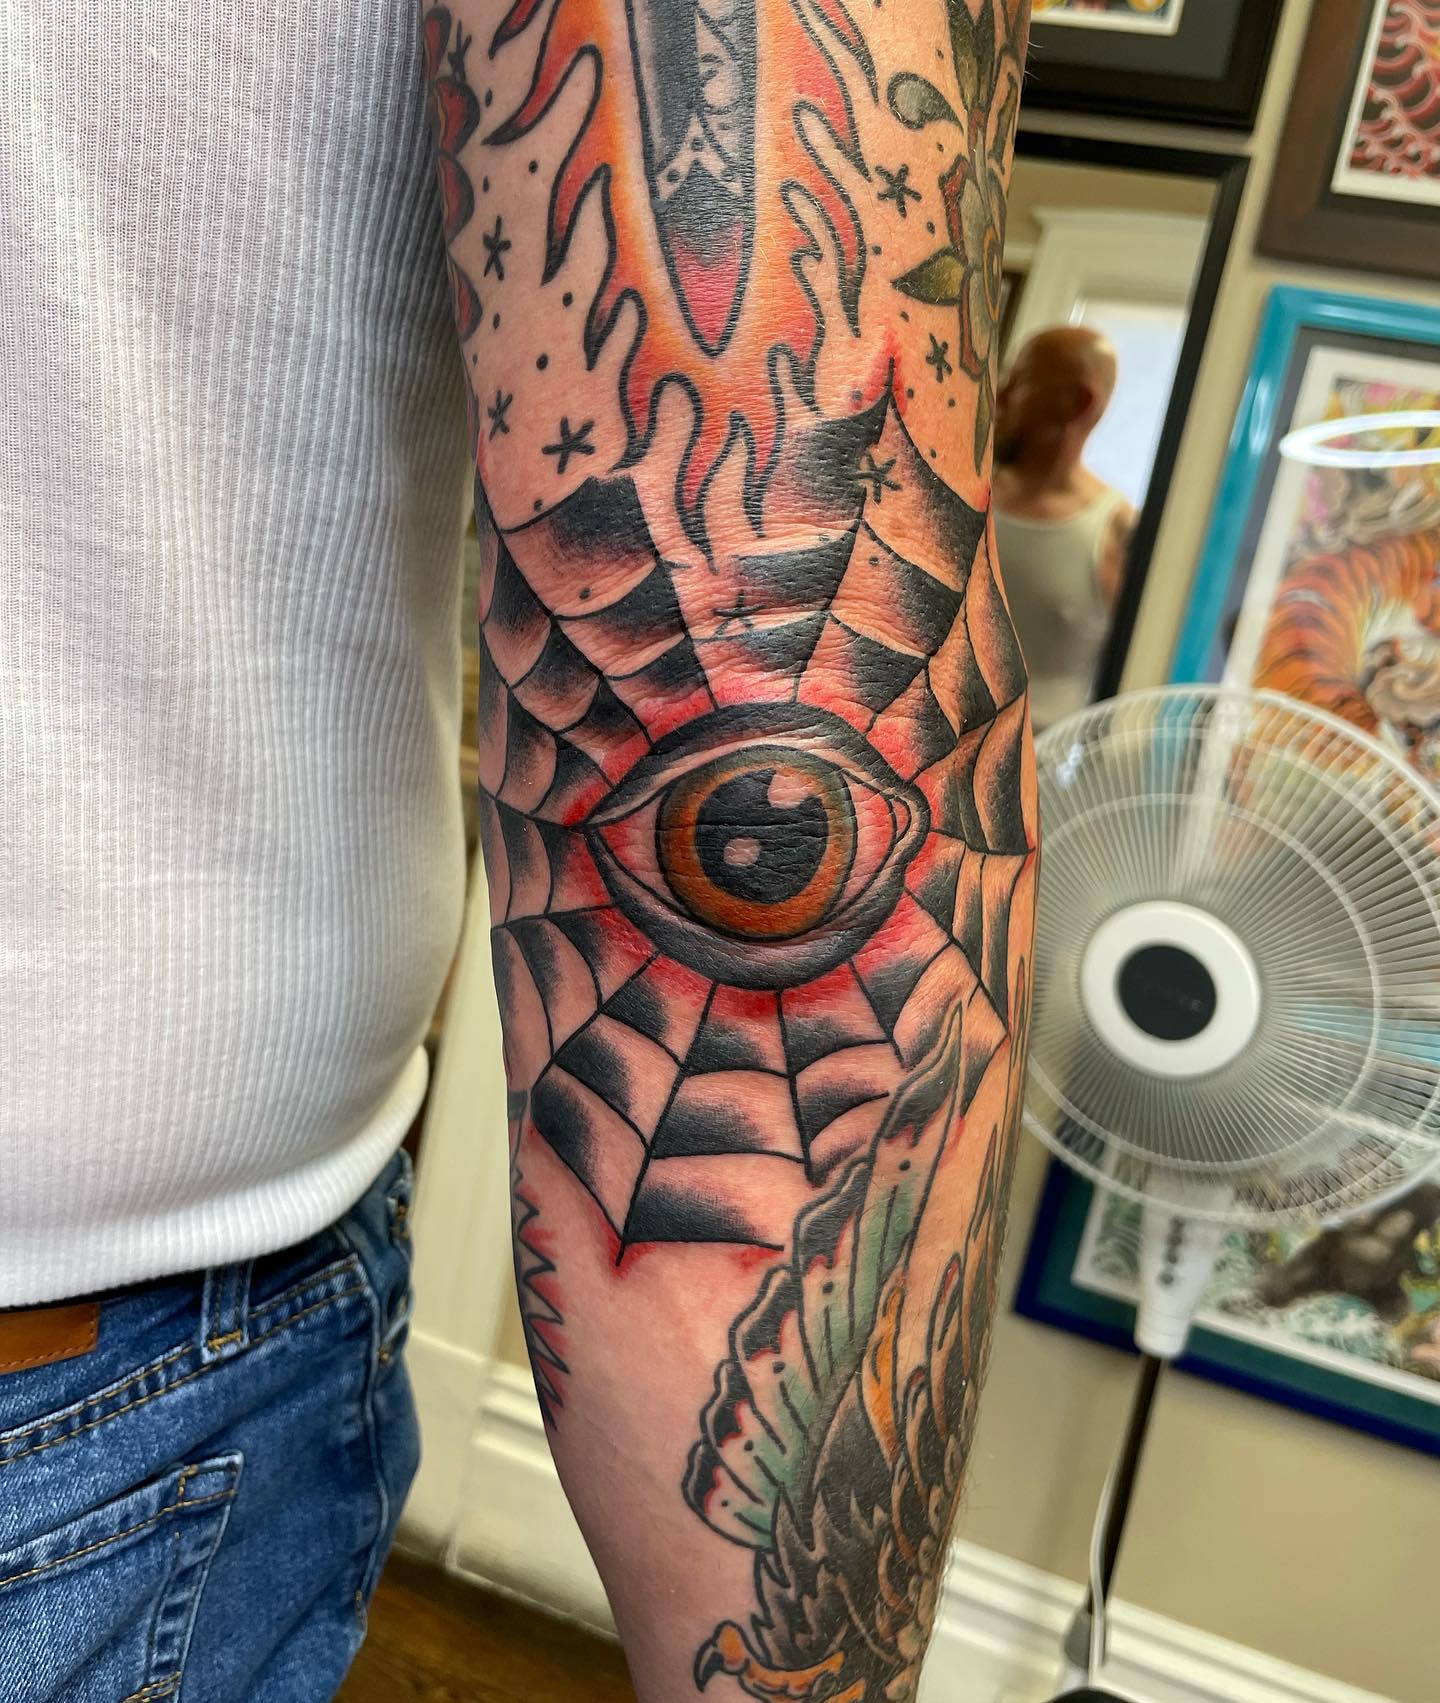 One eye placed on your elbow can be a symbol of you predicting and seeing the future as they are. If you like darker colors give it a go with this tattoo.